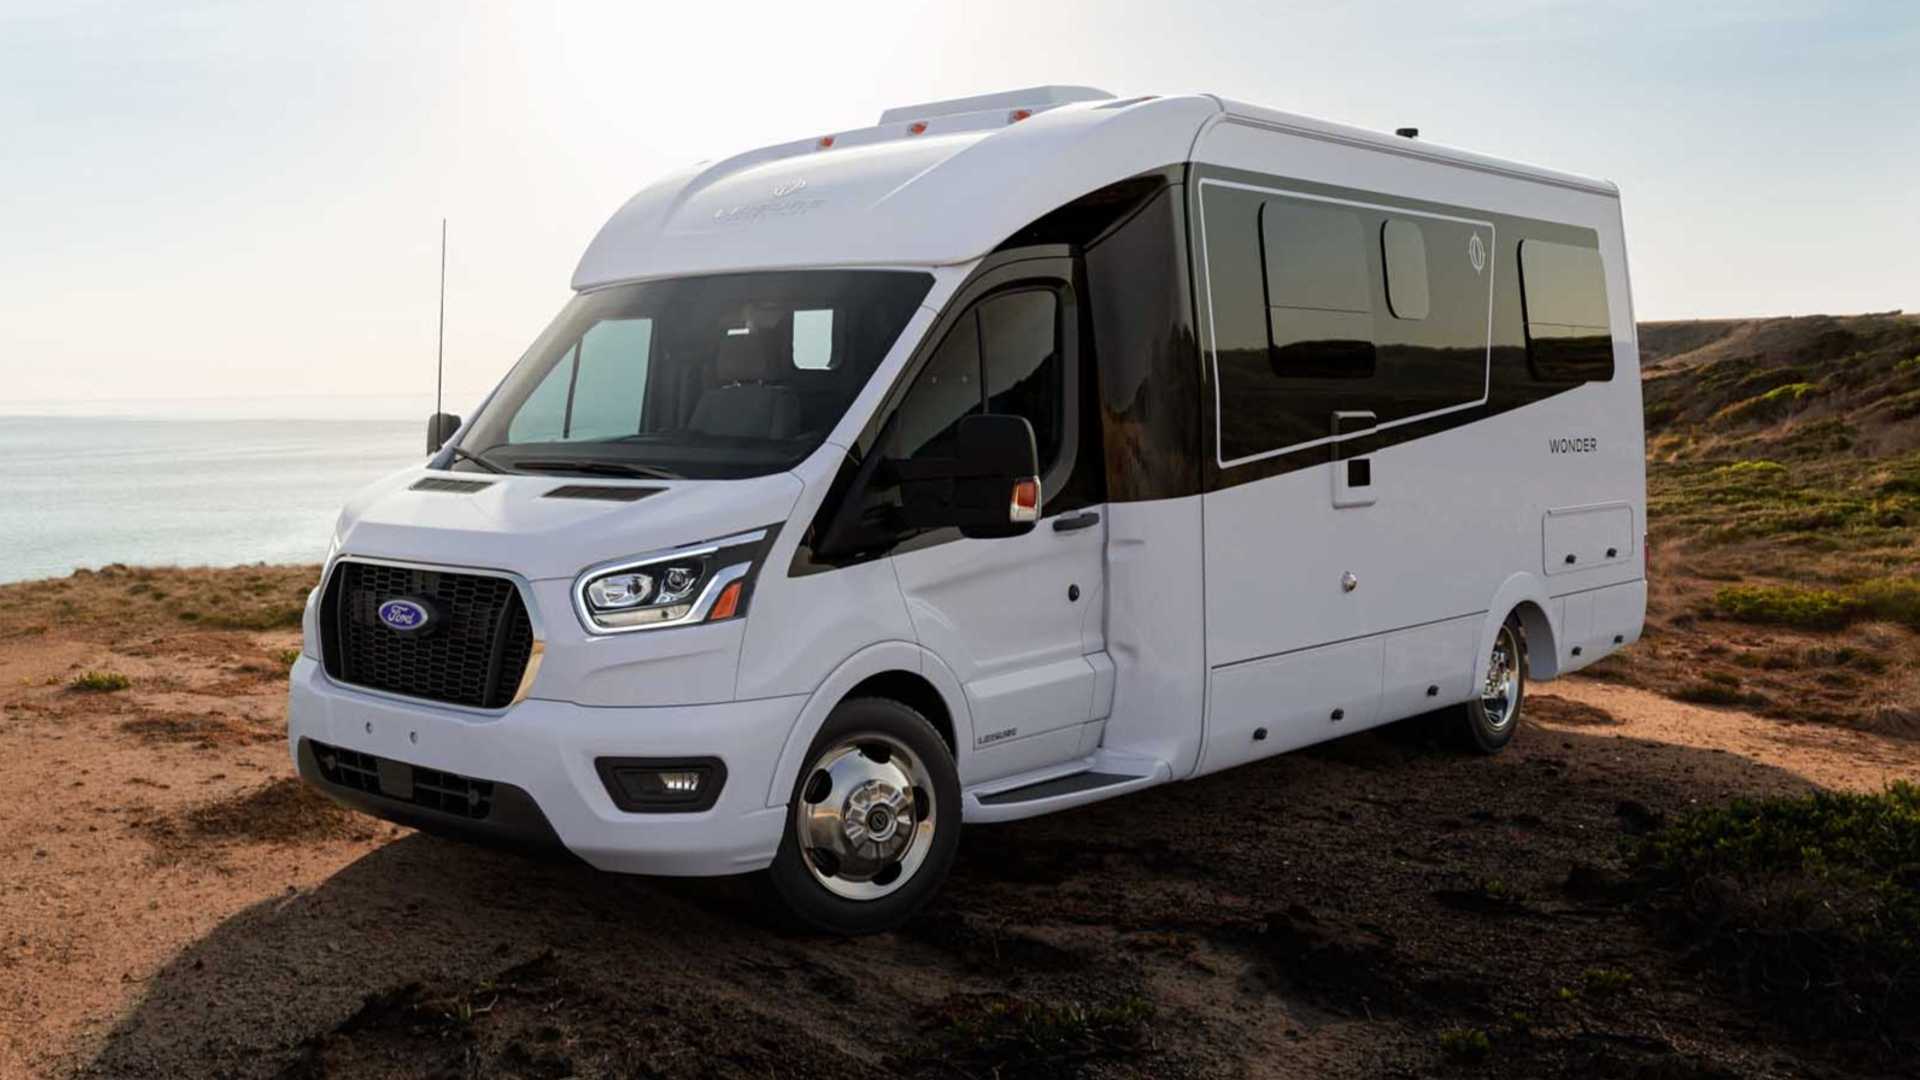 Ford Transit Rv Gets Awesome Rear Lounge Layout At Cheaper Price